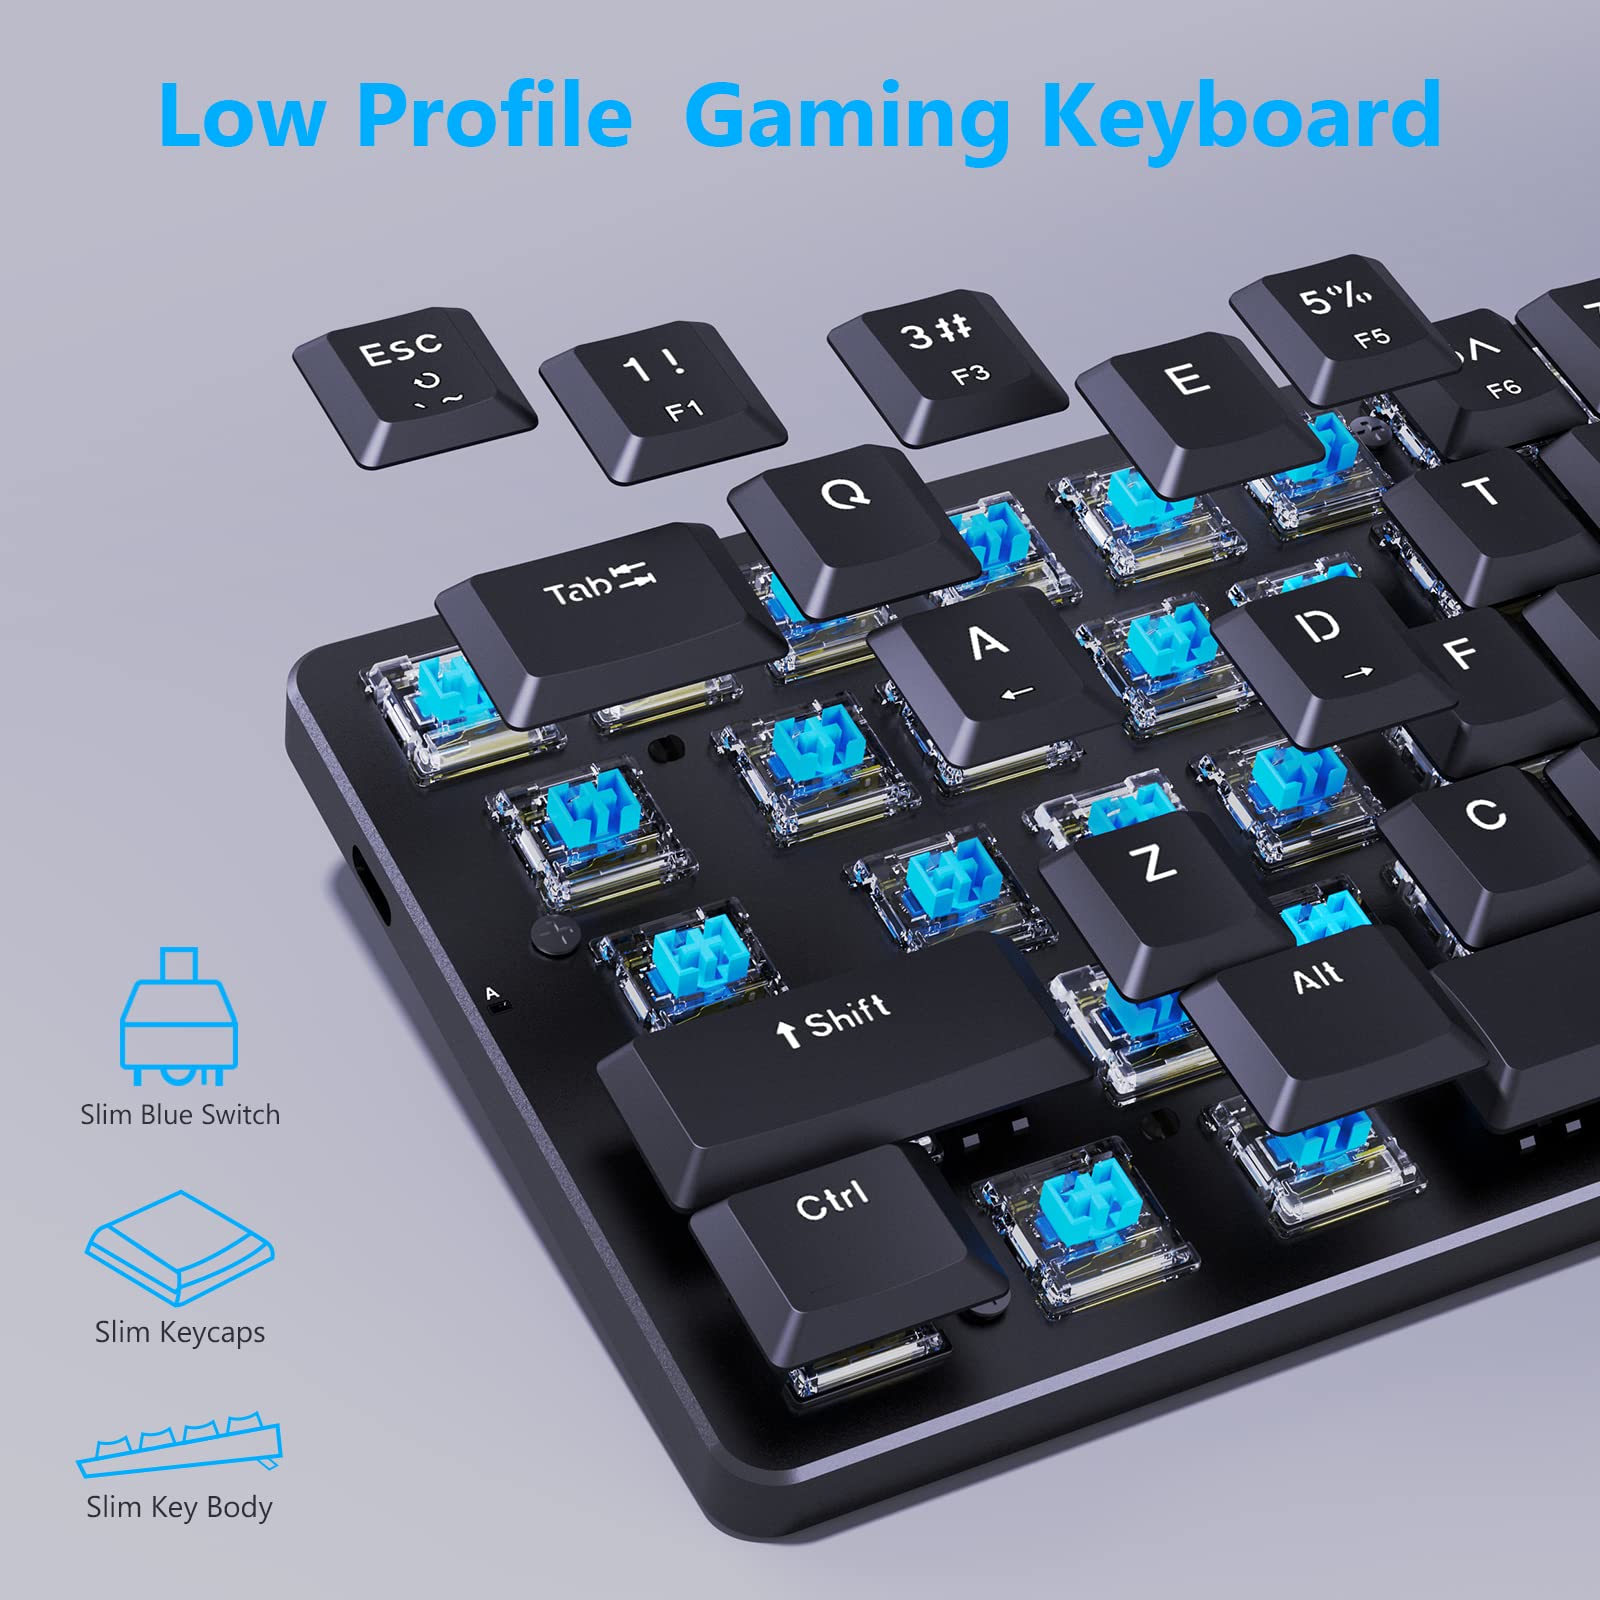 Redragon 60 Percent Mini Keyboard, Mechanical Gaming Keyboard with Low Profile Blue Switches, 18 LED Backlits, Wired Compact Portable Keyboard for Windows PC Mac, Typing, Travel, K615